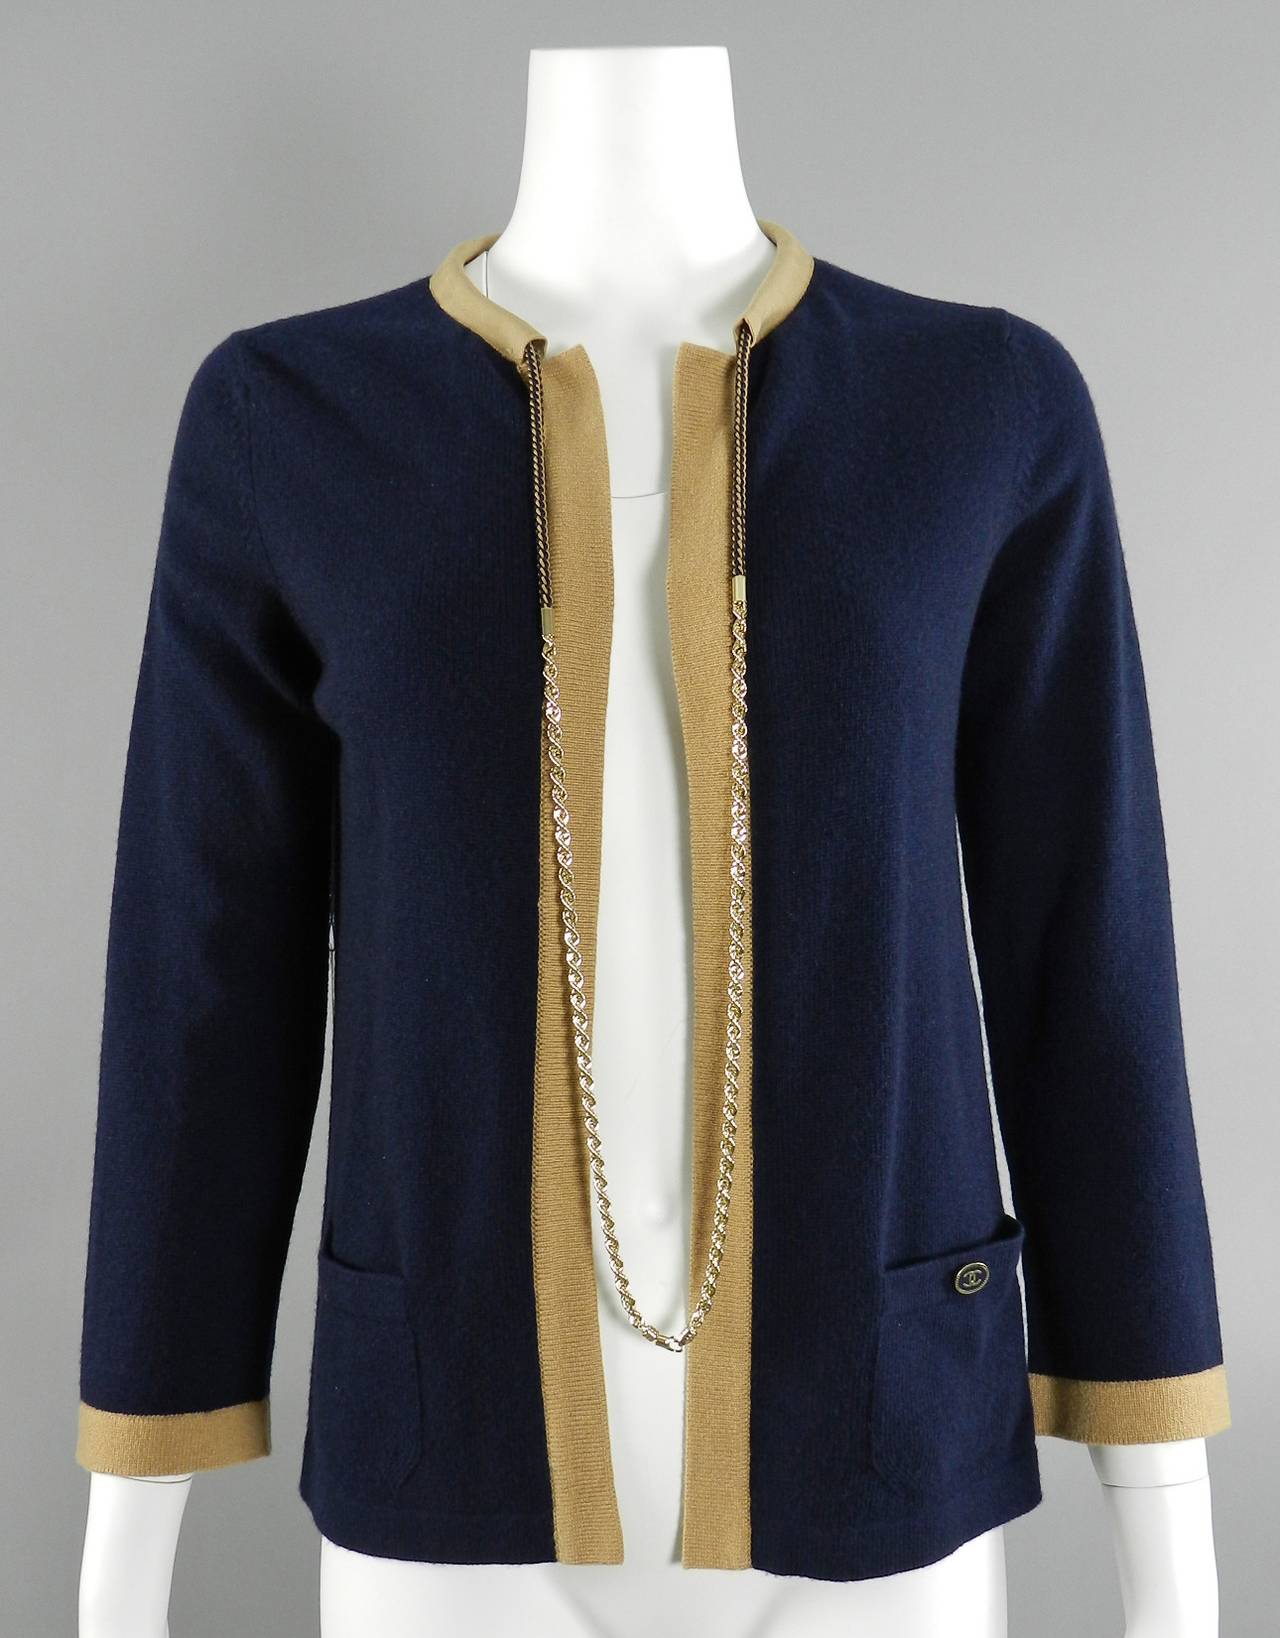 Chanel 11P navy and camel cashmere cardigan with gold chain. Excellent condition - worn once if at all. 100% cashmere. Tagged size Chanel 38 (about USA 6). Garment measures 36